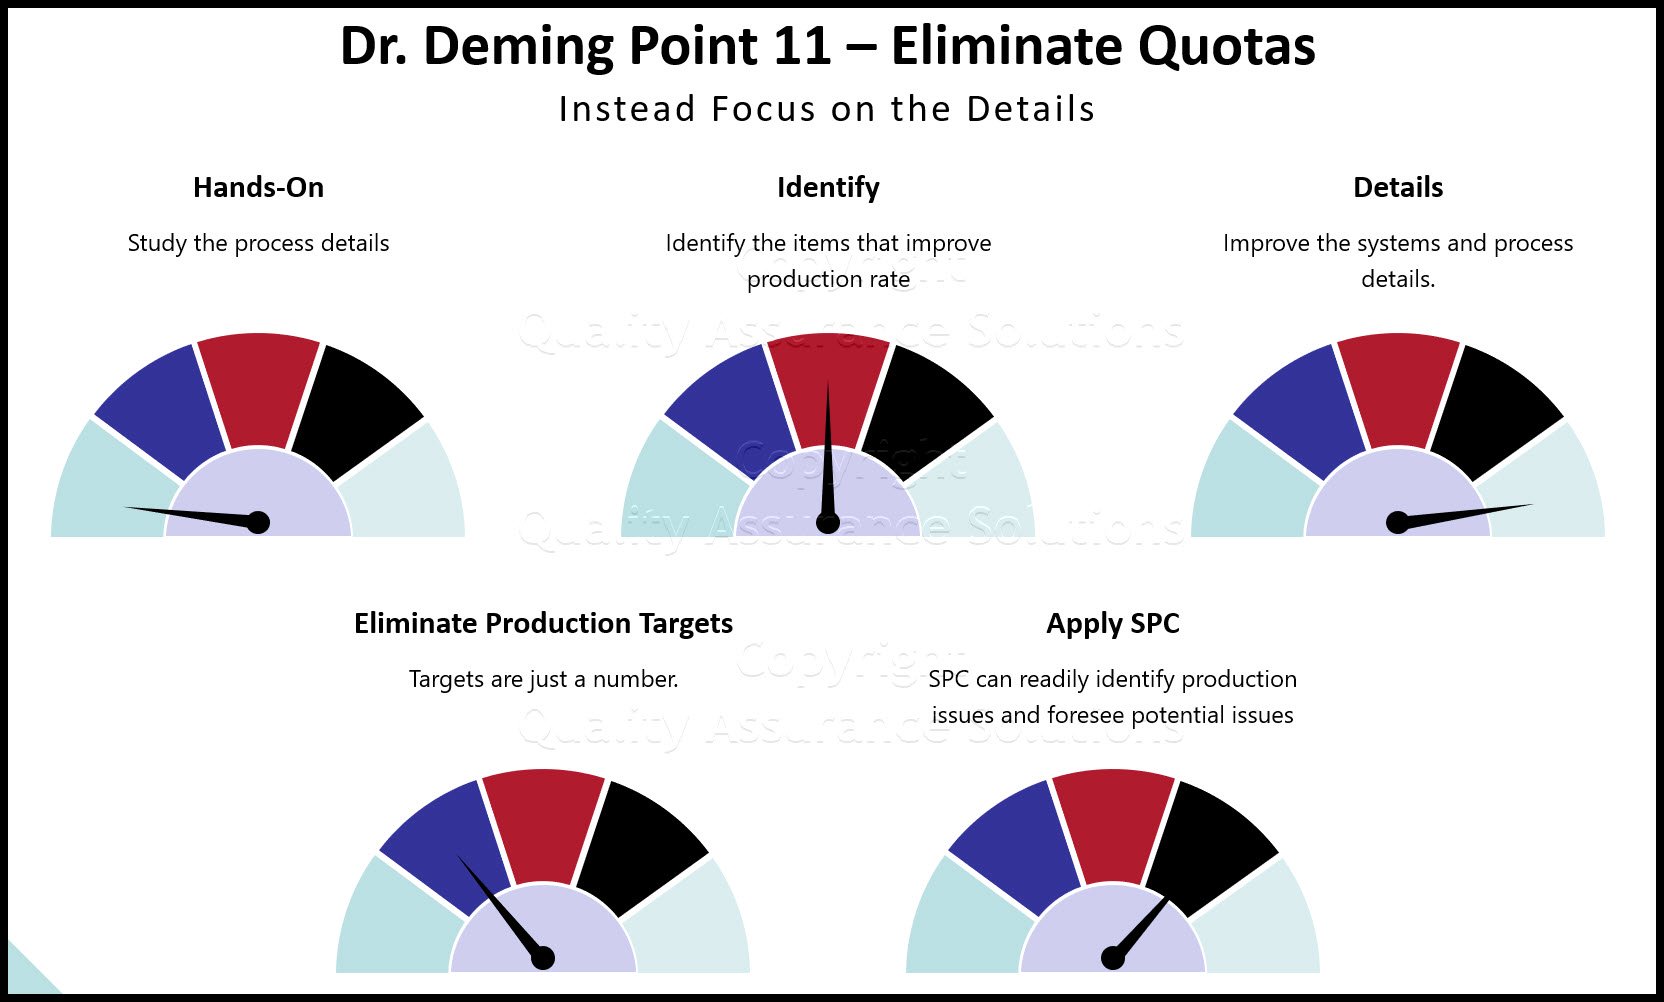 Learn Dr Deming Point 11, one of Deming 14 points, which stresses to eliminate numerical quotas